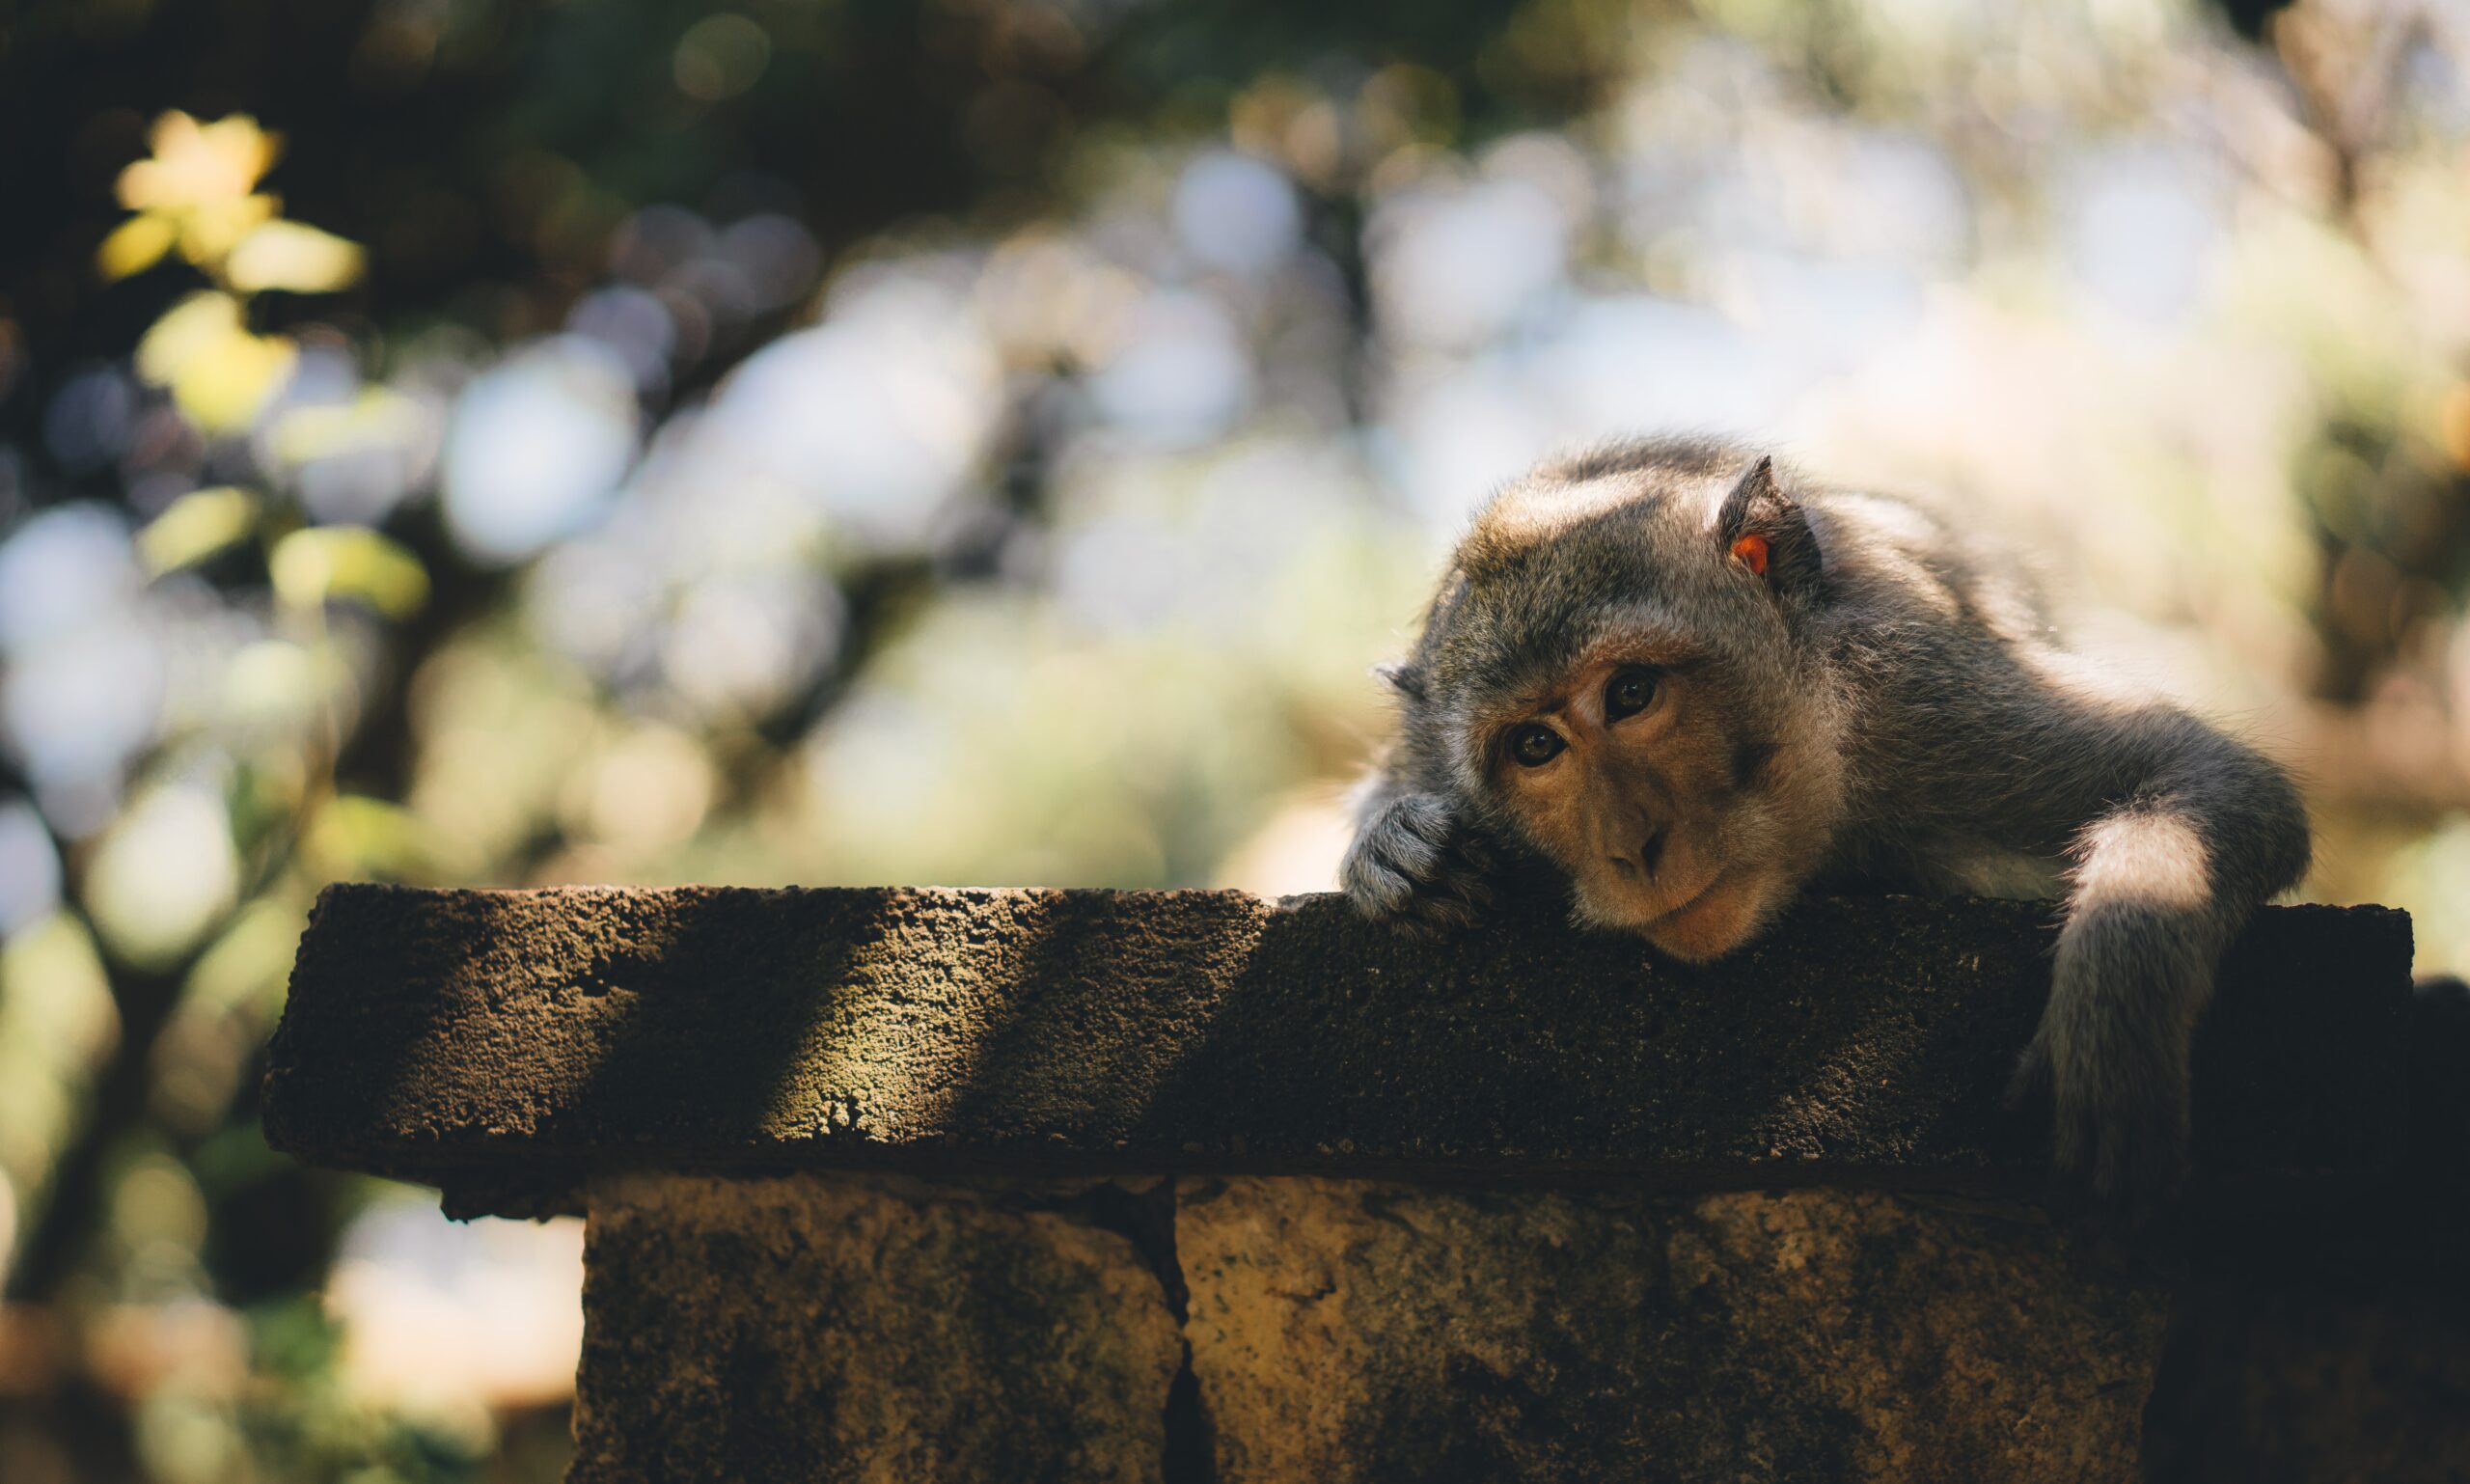 This monkey must be grading papers. He looks bored enough.